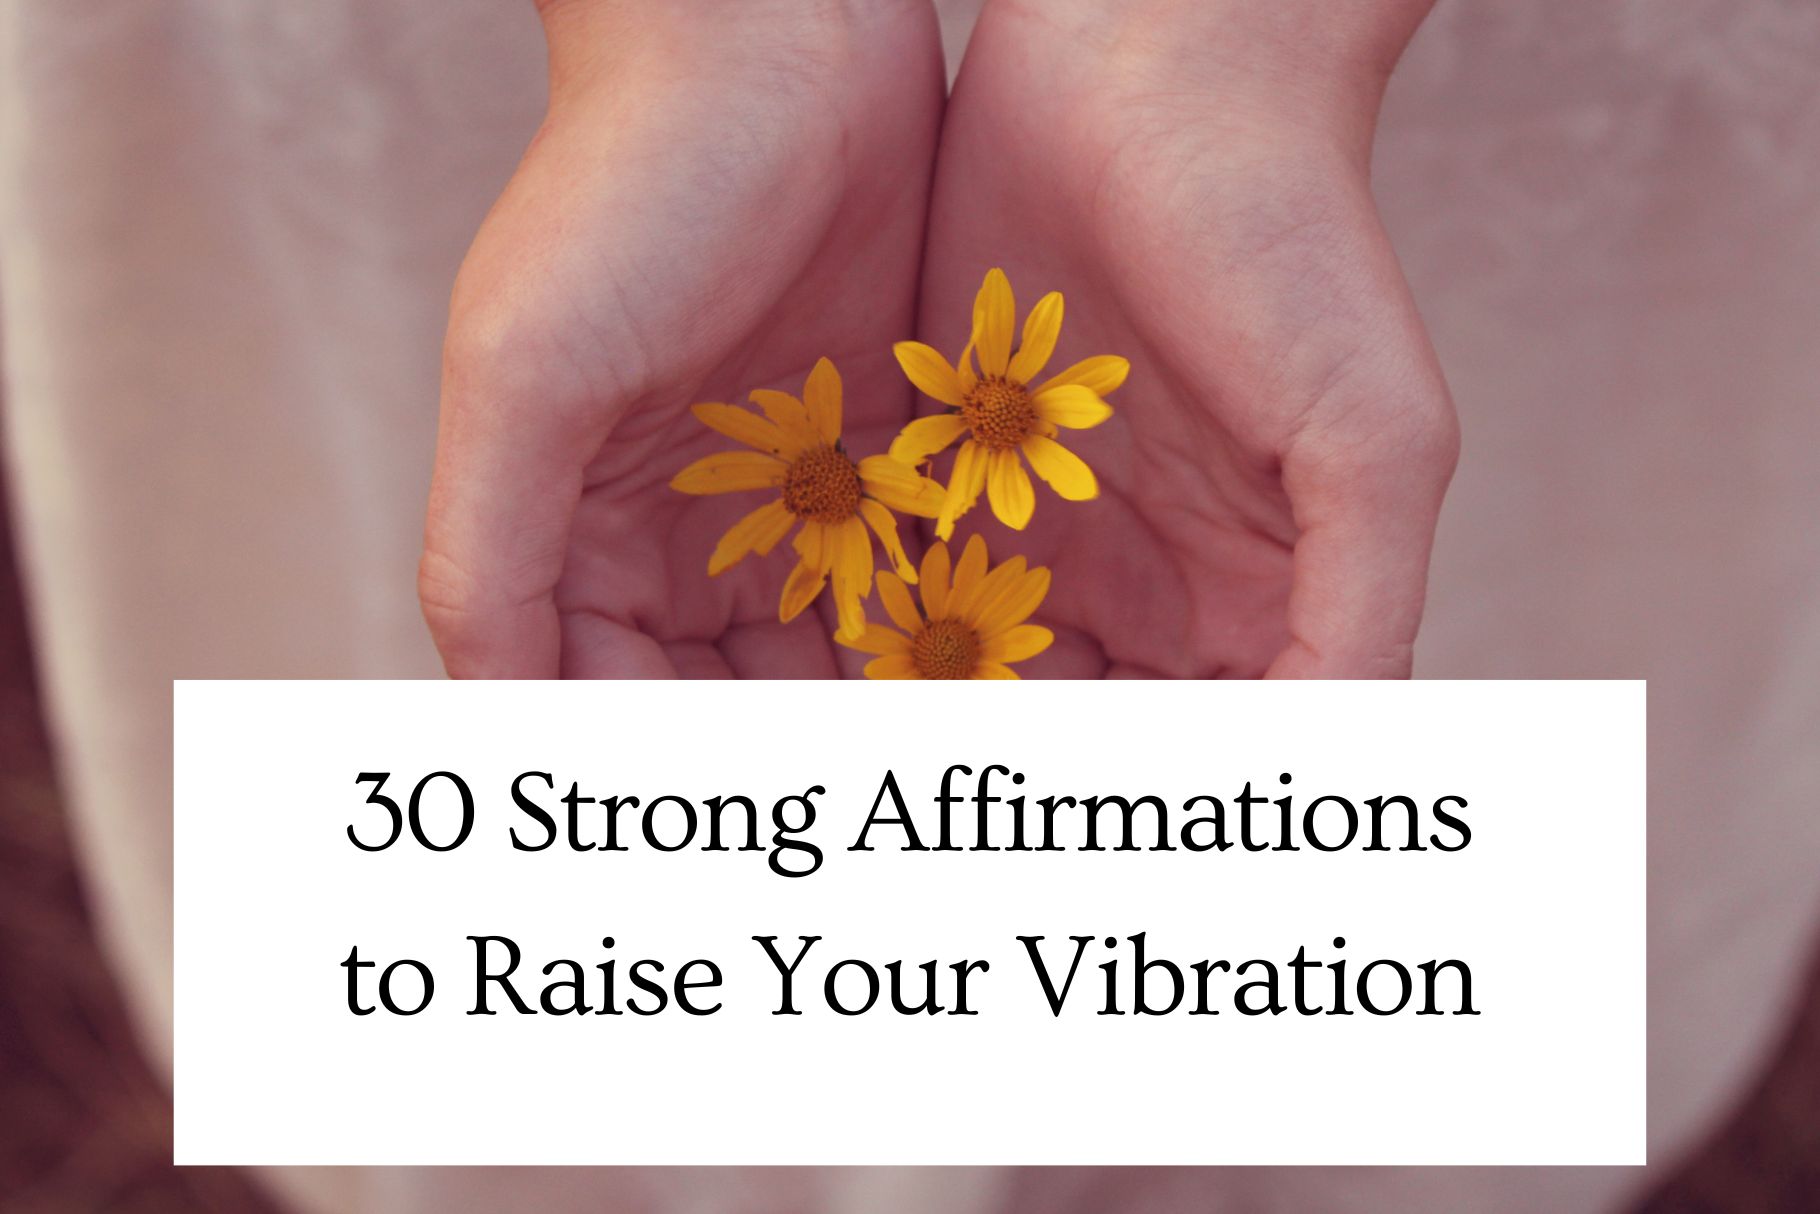 30 strong affirmations to raise your vibration